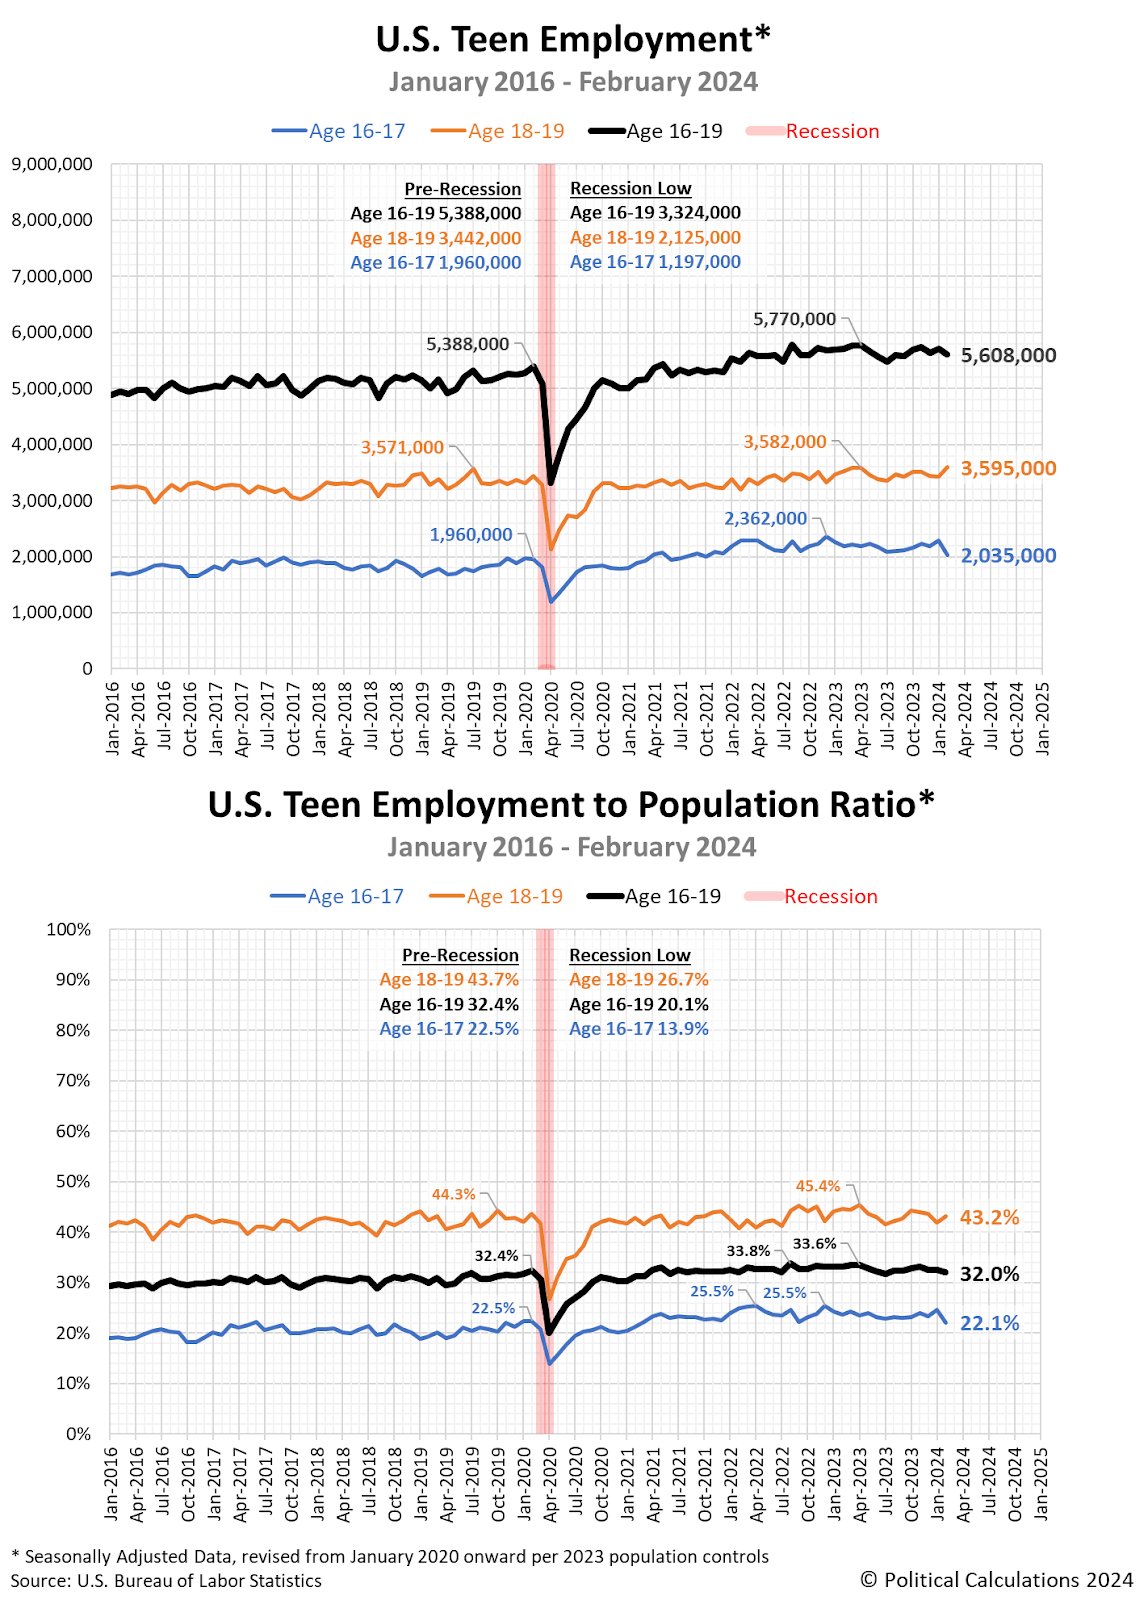 U.S. Teen Employment and Teen Employment to Population Ratio, January 2016 - February 2024